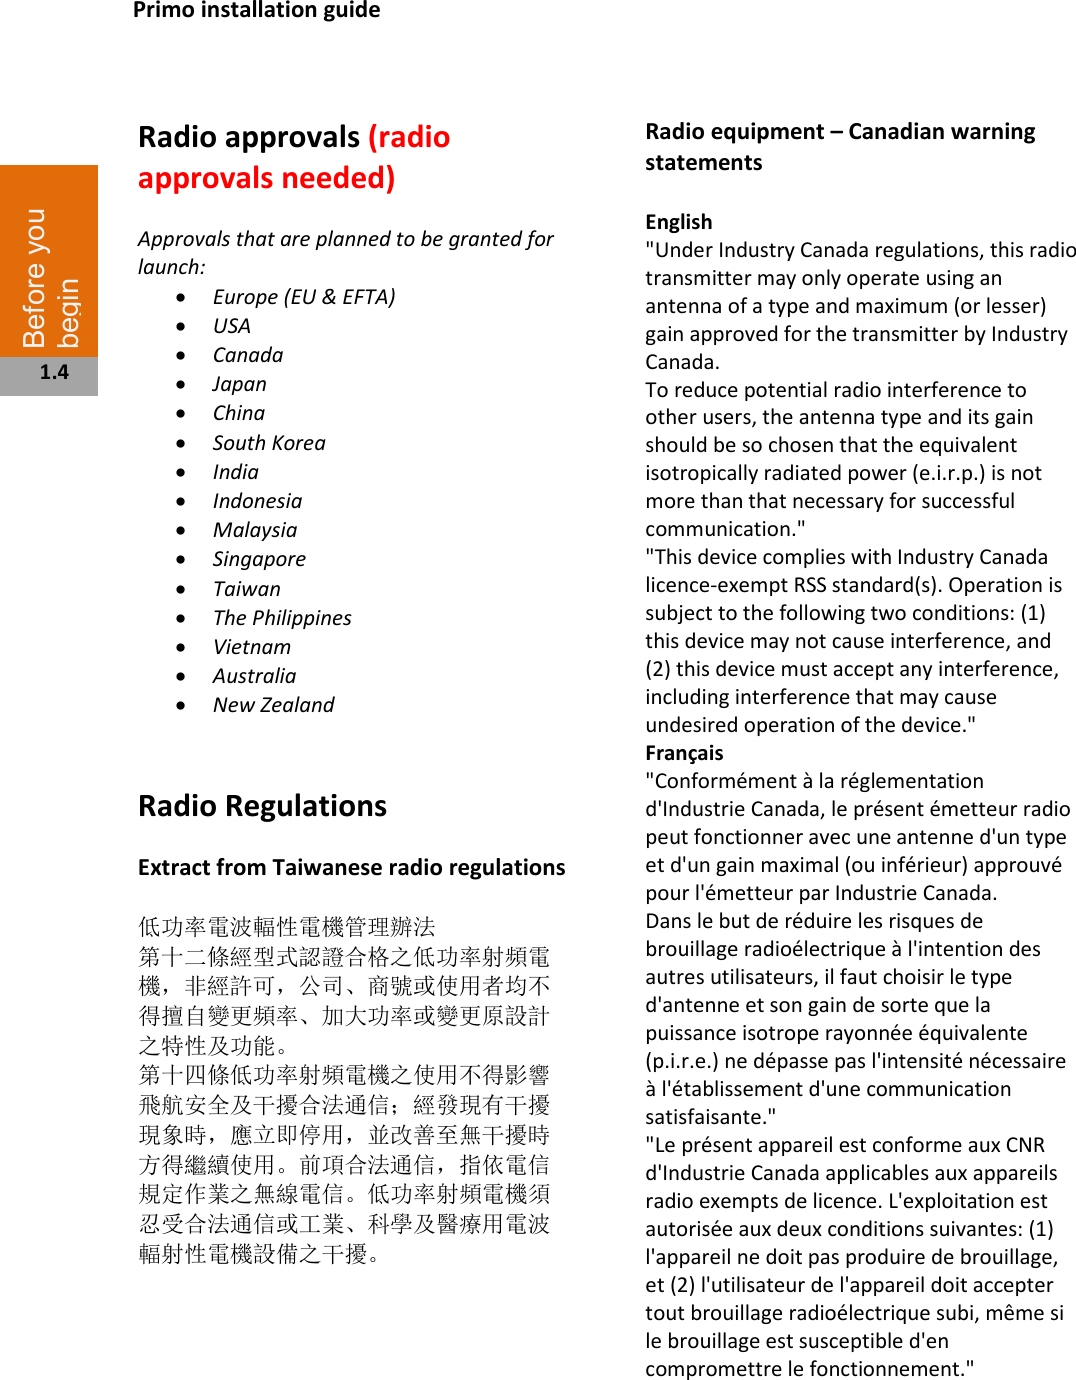   Radio approvals (radio approvals needed)  Approvals that are planned to be granted for launch: • Europe (EU &amp; EFTA) • USA • Canada • Japan • China • South Korea • India • Indonesia • Malaysia • Singapore • Taiwan • The Philippines • Vietnam • Australia • New Zealand   Radio Regulations   Extract from Taiwanese radio regulations  低功率電波輻性電機管理辦法 第十二條經型式認證合格之低功率射頻電機，非經許可，公司、商號或使用者均不 得擅自變更頻率、加大功率或變更原設計之特性及功能。 第十四條低功率射頻電機之使用不得影響飛航安全及干擾合法通信；經發現有干擾 現象時，應立即停用，並改善至無干擾時方得繼續使用。前項合法通信，指依電信 規定作業之無線電信。低功率射頻電機須忍受合法通信或工業、科學及醫療用電波 輻射性電機設備之干擾。          Radio equipment – Canadian warning statements  English &quot;Under Industry Canada regulations, this radio transmitter may only operate using an antenna of a type and maximum (or lesser) gain approved for the transmitter by Industry Canada. To reduce potential radio interference to other users, the antenna type and its gain should be so chosen that the equivalent isotropically radiated power (e.i.r.p.) is not more than that necessary for successful communication.&quot; &quot;This device complies with Industry Canada licence-exempt RSS standard(s). Operation is subject to the following two conditions: (1) this device may not cause interference, and (2) this device must accept any interference, including interference that may cause undesired operation of the device.&quot; Français  &quot;Conformément à la réglementation d&apos;Industrie Canada, le présent émetteur radio peut fonctionner avec une antenne d&apos;un type et d&apos;un gain maximal (ou inférieur) approuvé pour l&apos;émetteur par Industrie Canada. Dans le but de réduire les risques de brouillage radioélectrique à l&apos;intention des autres utilisateurs, il faut choisir le type d&apos;antenne et son gain de sorte que la puissance isotrope rayonnée équivalente (p.i.r.e.) ne dépasse pas l&apos;intensité nécessaire à l&apos;établissement d&apos;une communication satisfaisante.&quot; &quot;Le présent appareil est conforme aux CNR d&apos;Industrie Canada applicables aux appareils radio exempts de licence. L&apos;exploitation est autorisée aux deux conditions suivantes: (1) l&apos;appareil ne doit pas produire de brouillage, et (2) l&apos;utilisateur de l&apos;appareil doit accepter tout brouillage radioélectrique subi, même si le brouillage est susceptible d&apos;en compromettre le fonctionnement.&quot;    Primo installation guide Before you begin  1.4 